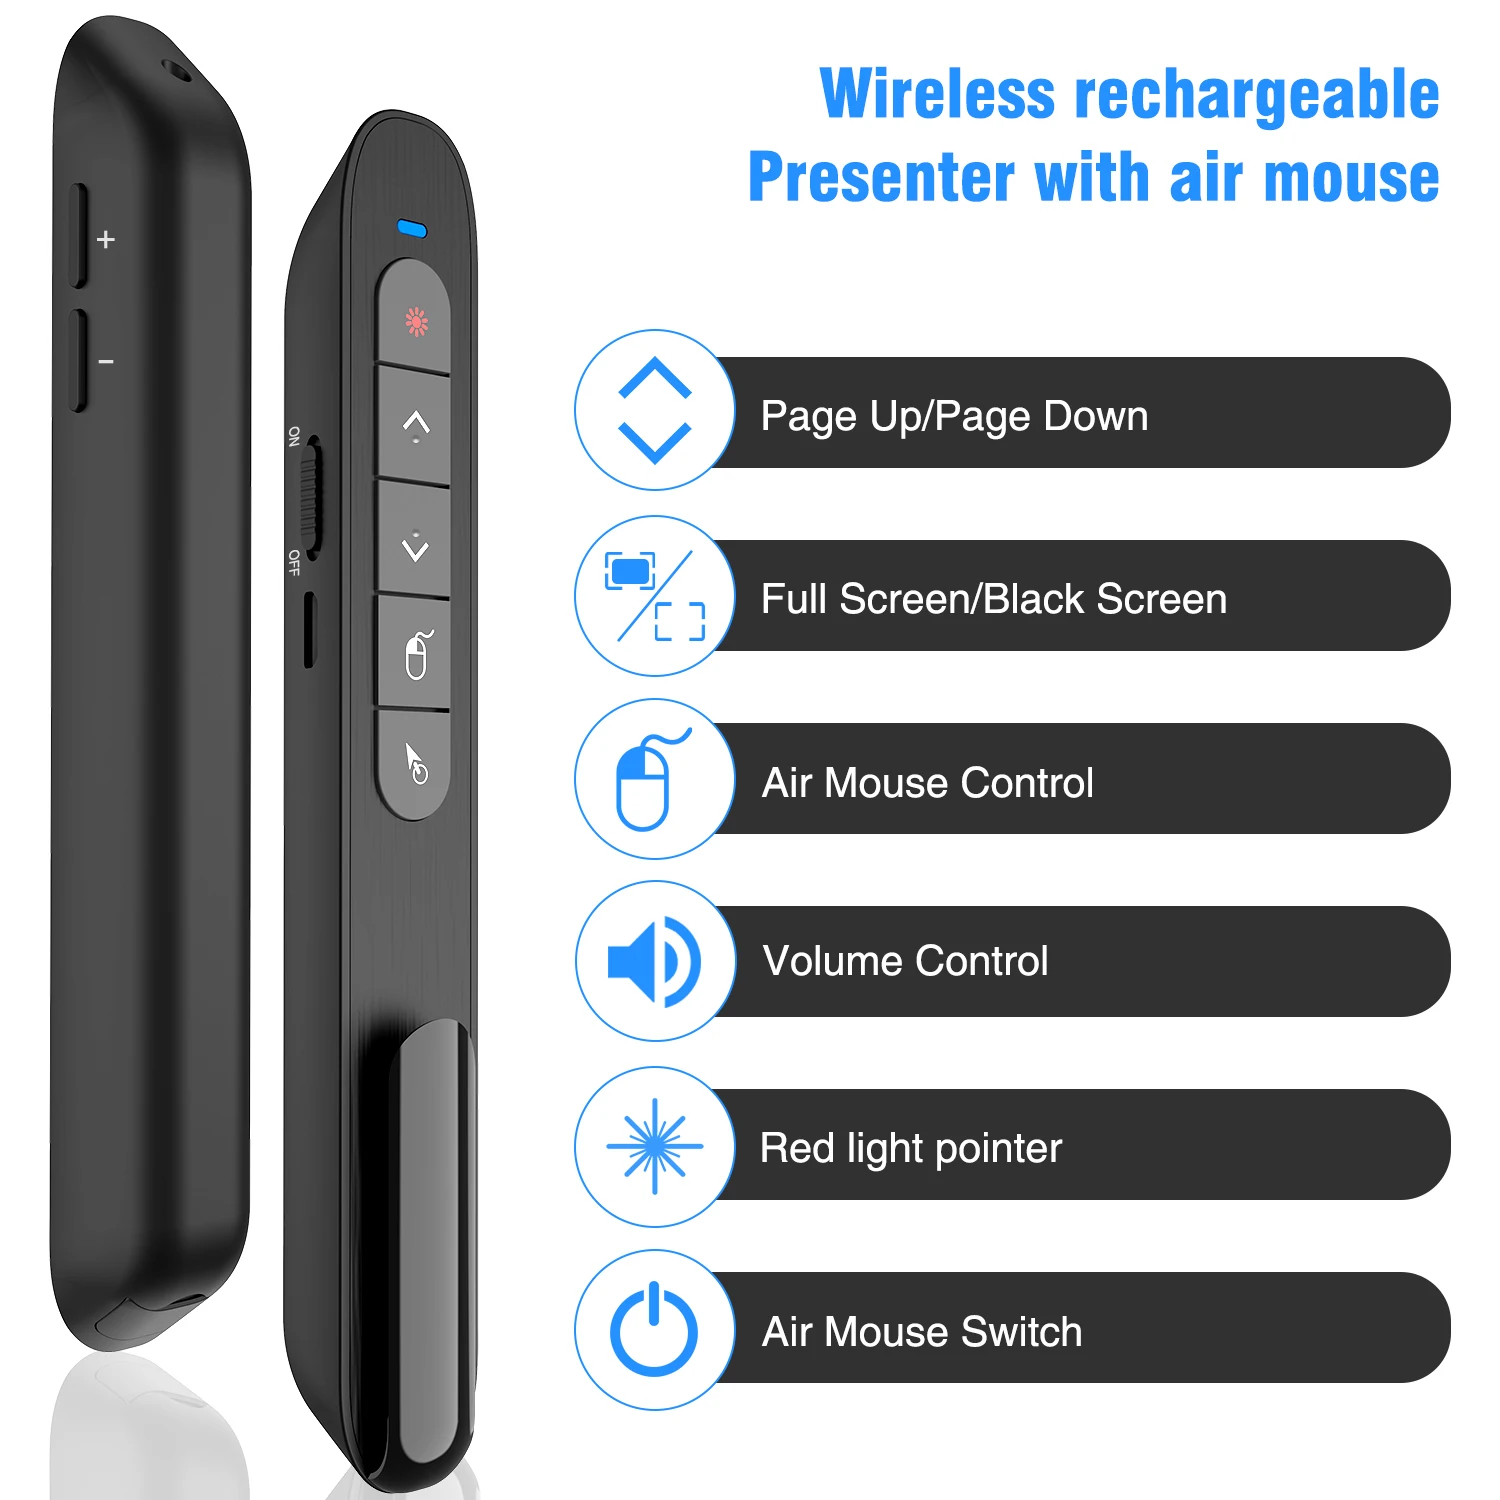 2.4GHz PowerPoint PPT Remote Control Clicker Zoweetek Wireless Presenter with Mouse Functions and Red Laser 